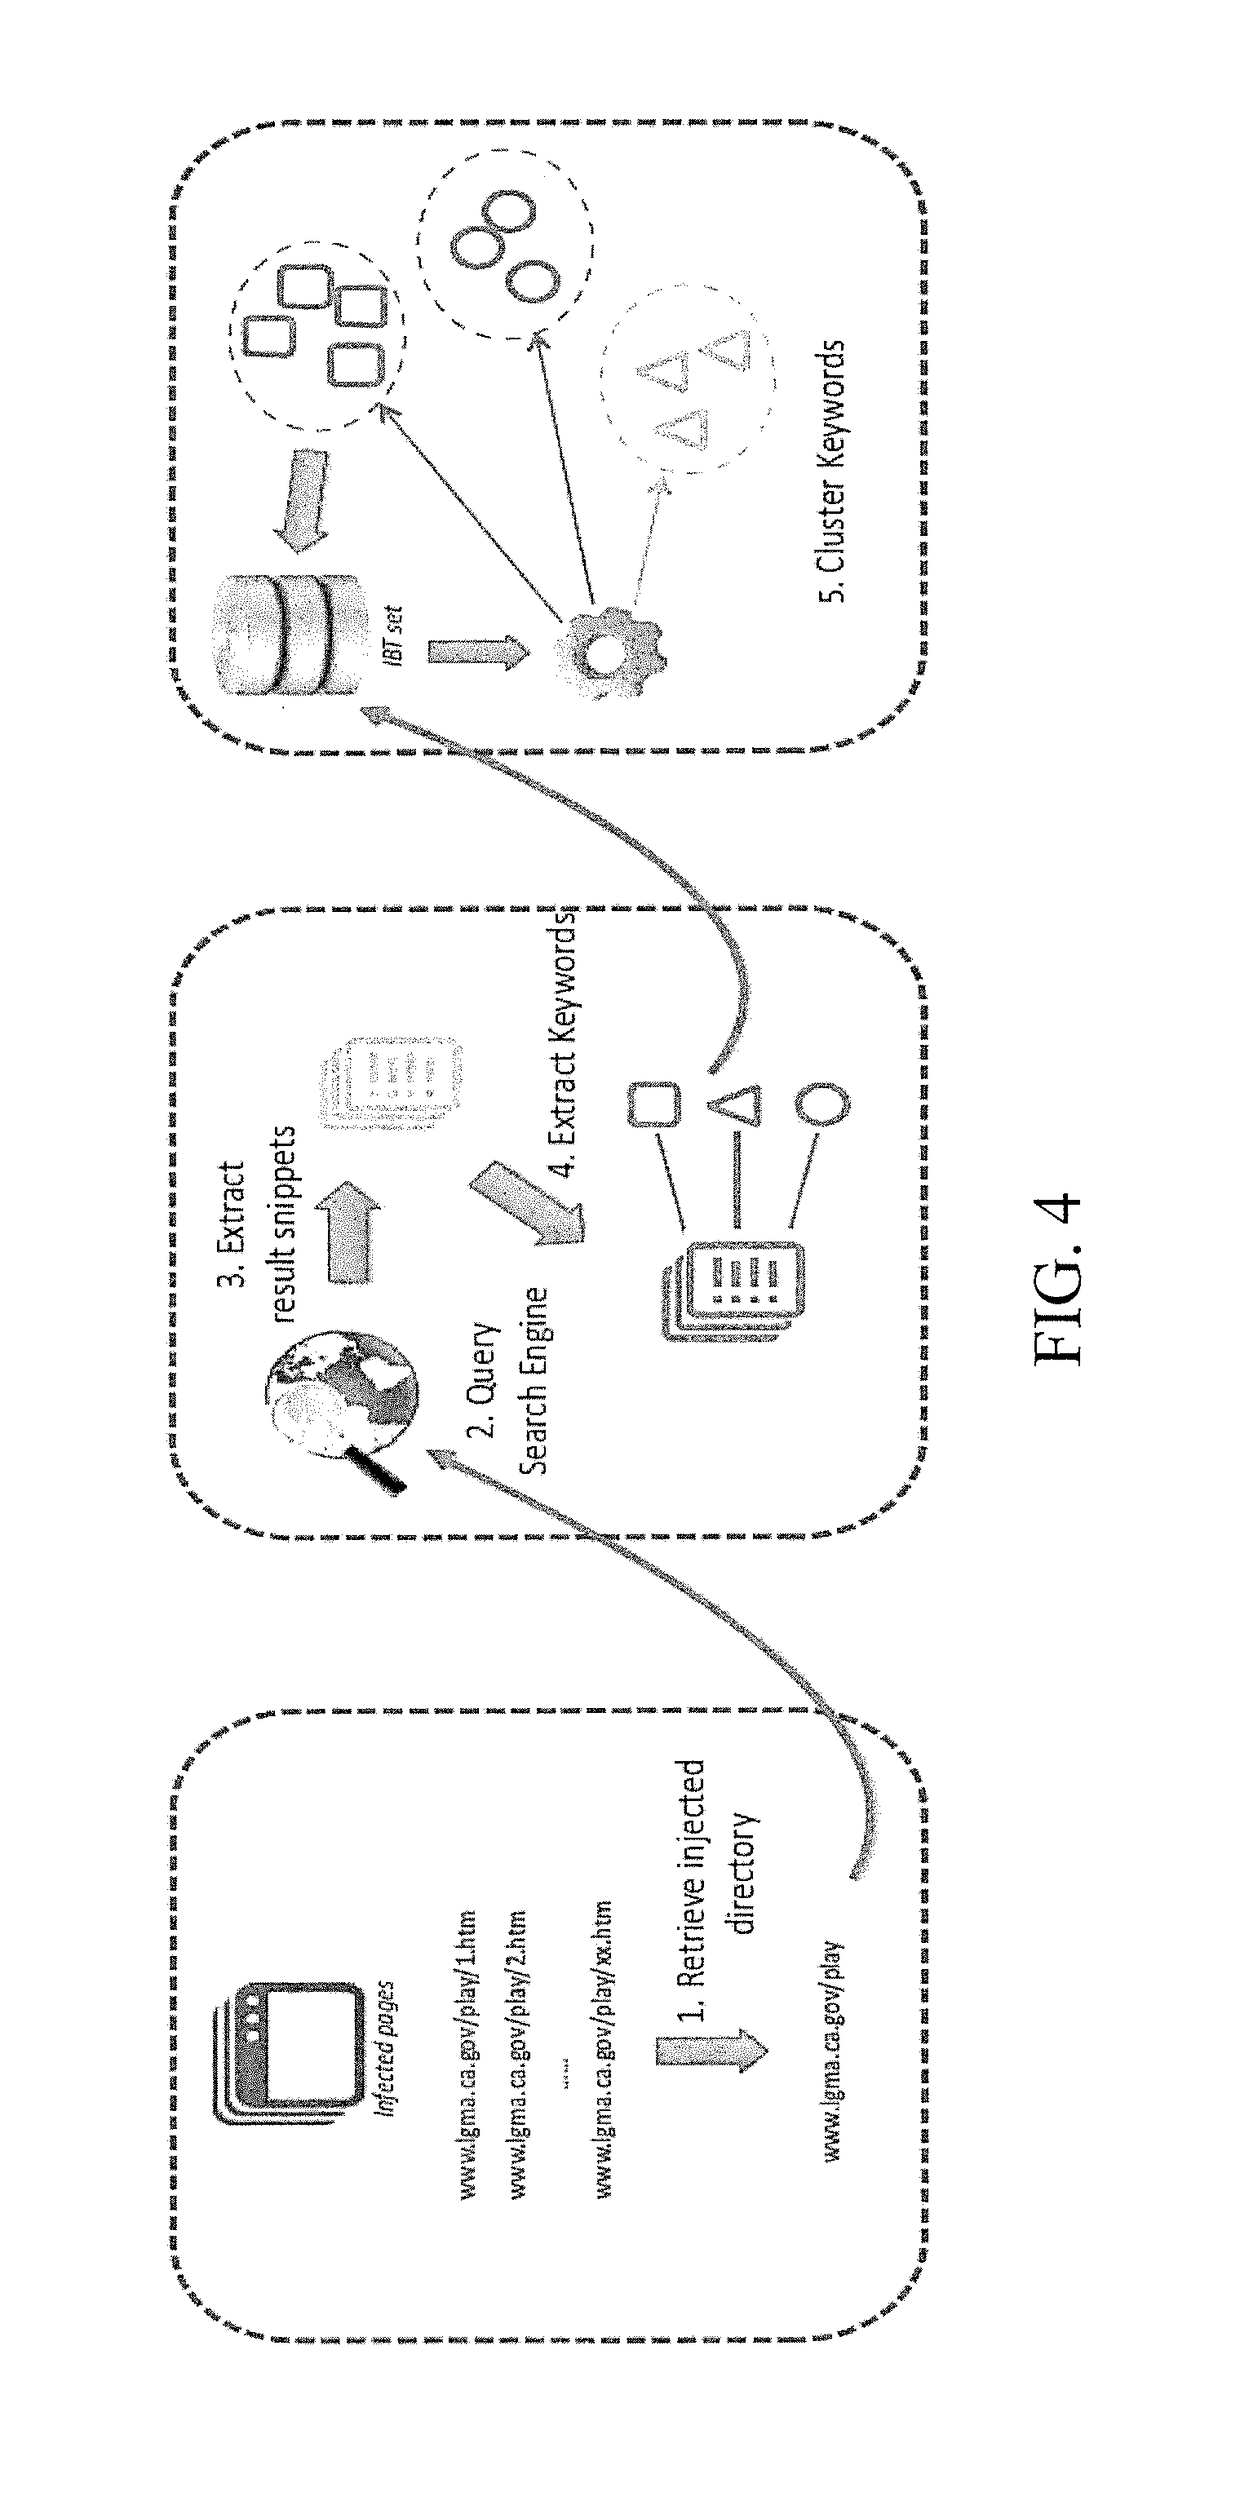 Systems and methods for detection of infected websites